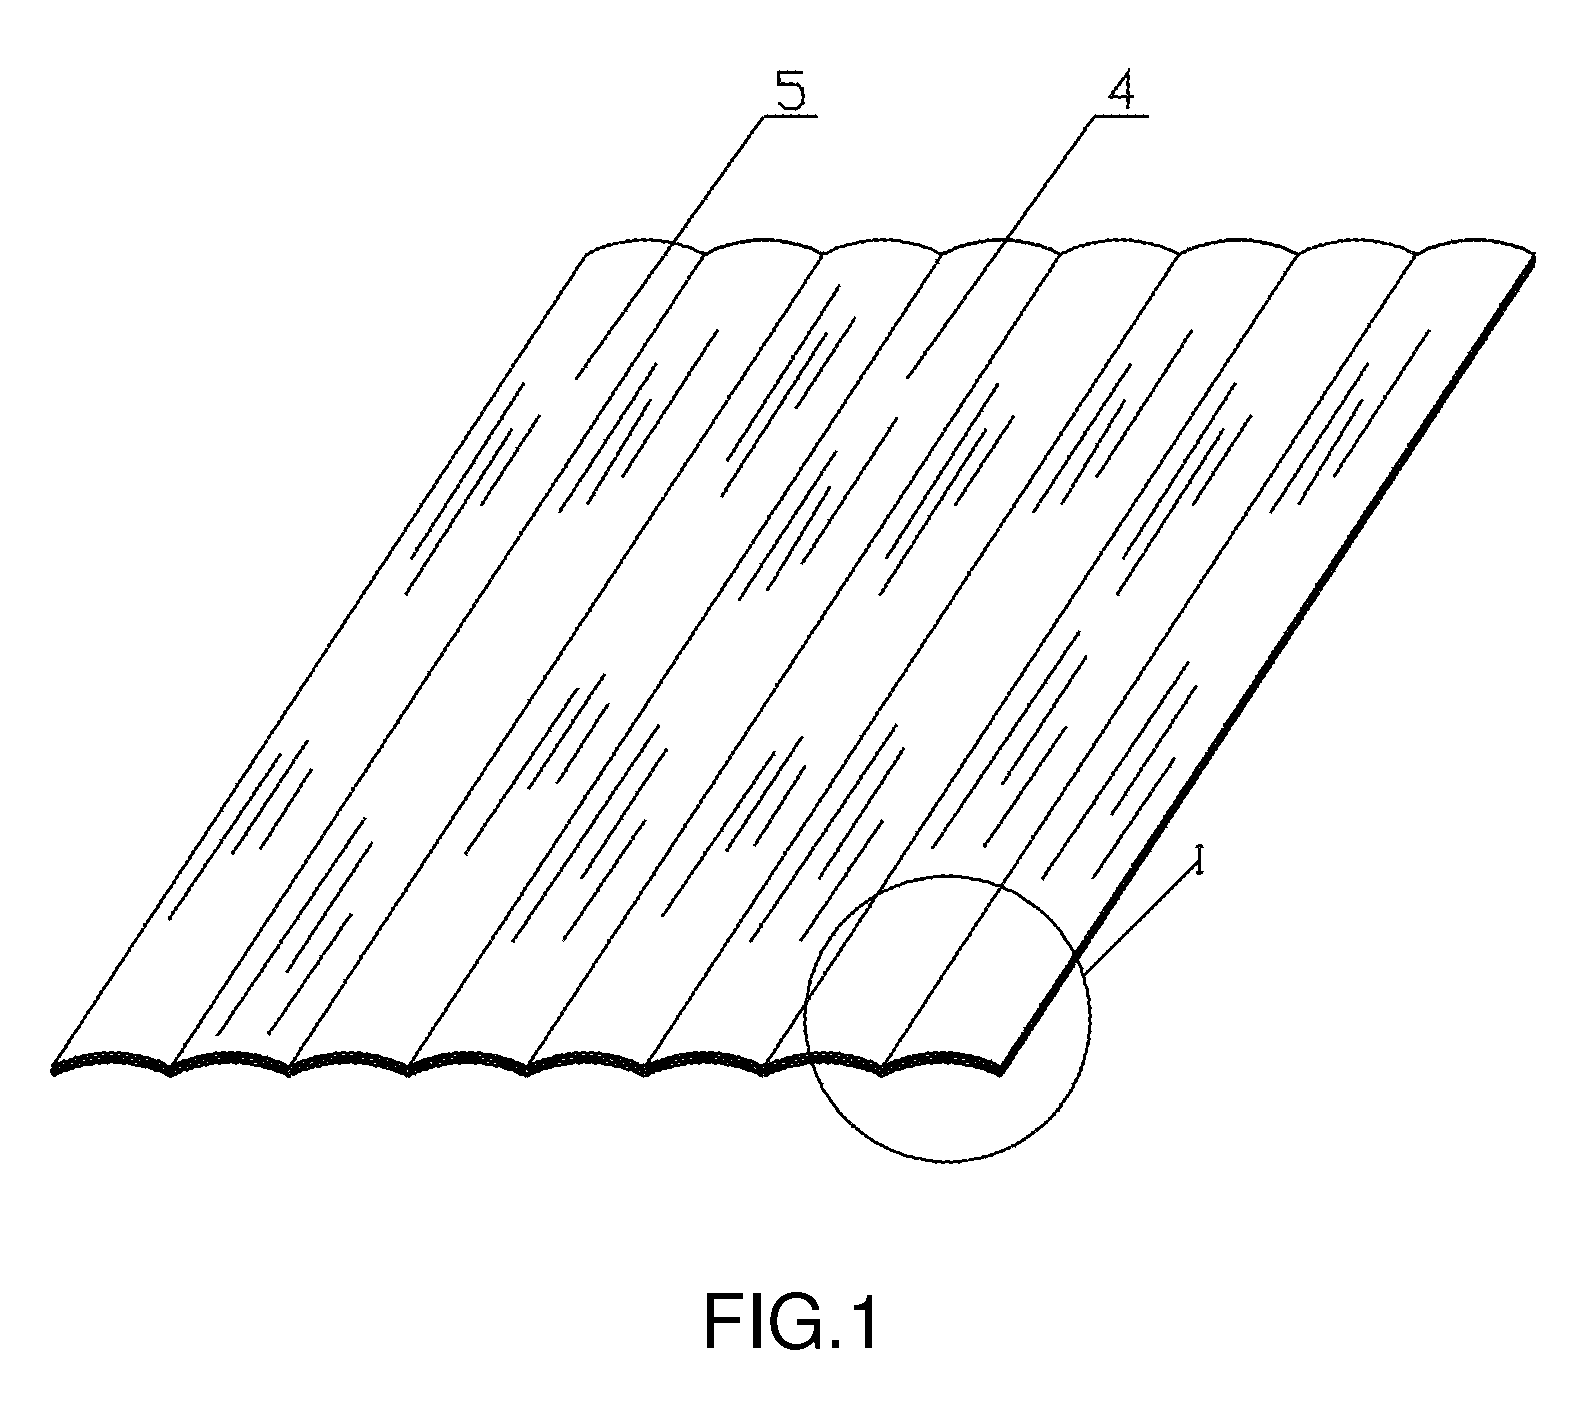 Method of making bamboo-surfaced layered Venetian blind slats having a curved cross-section